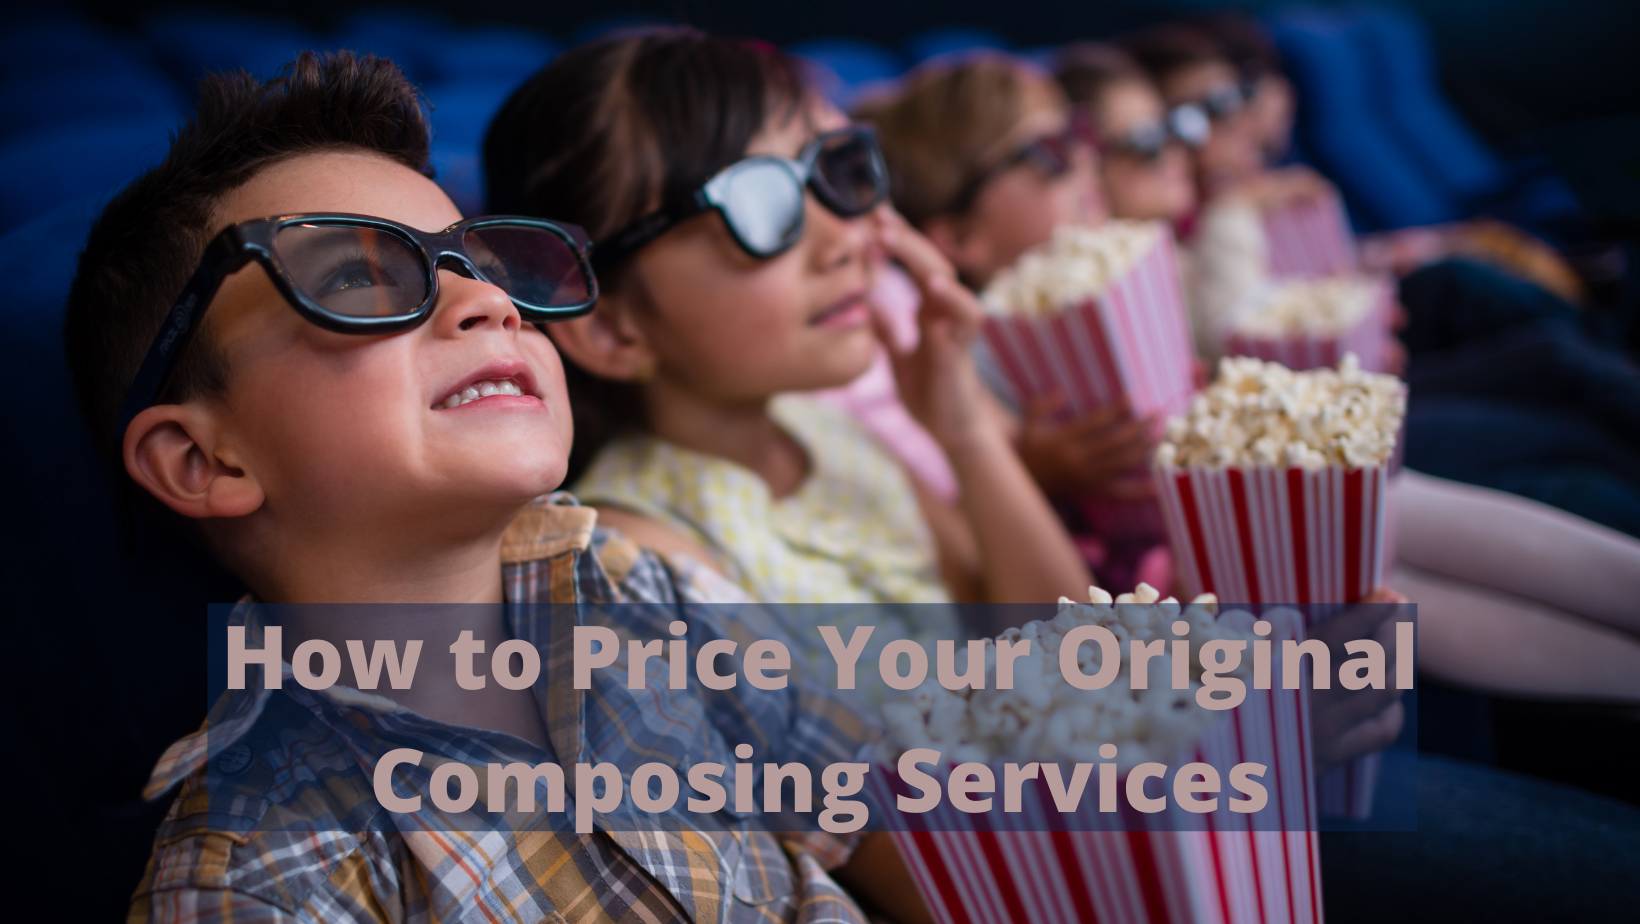 How to Price Your Original Composing Services